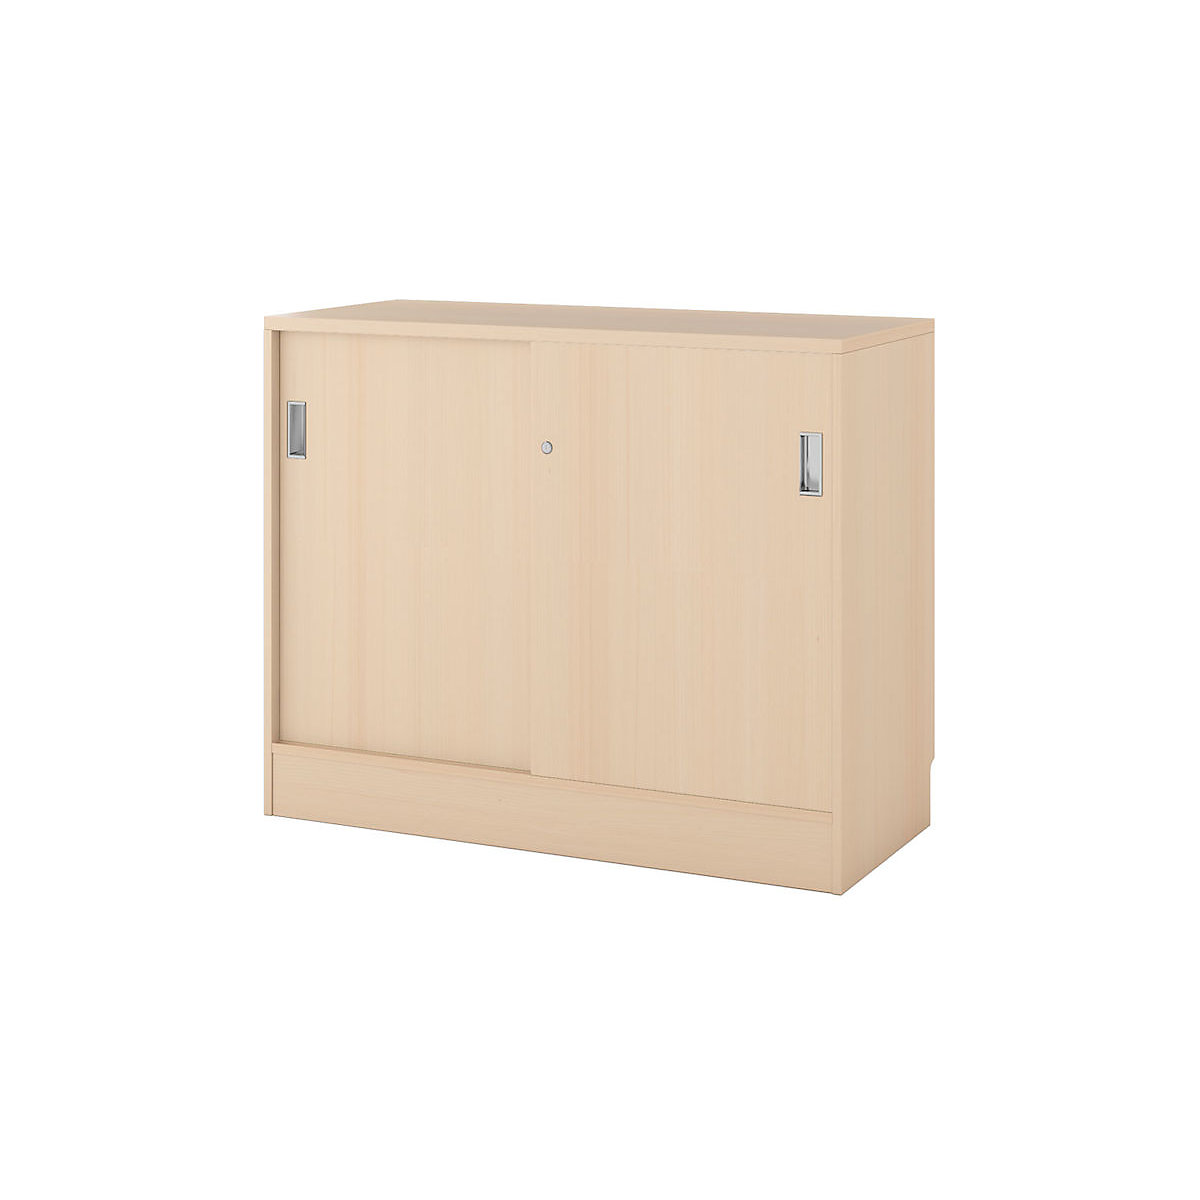 Chicago cupboard with sliding doors